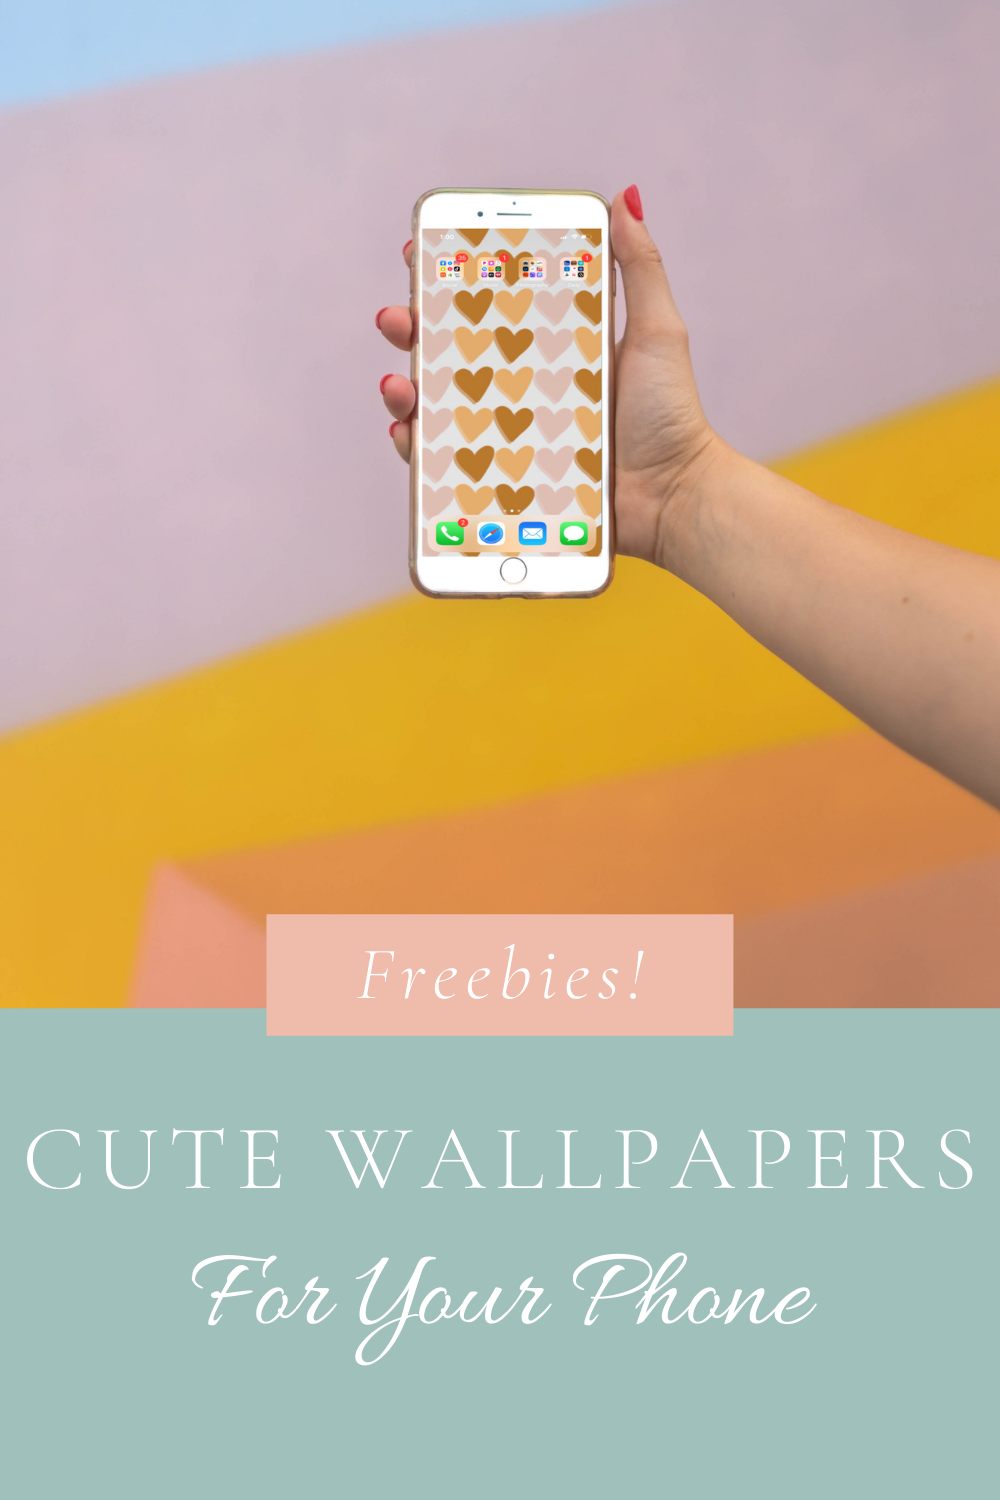 Cute free wallpapers